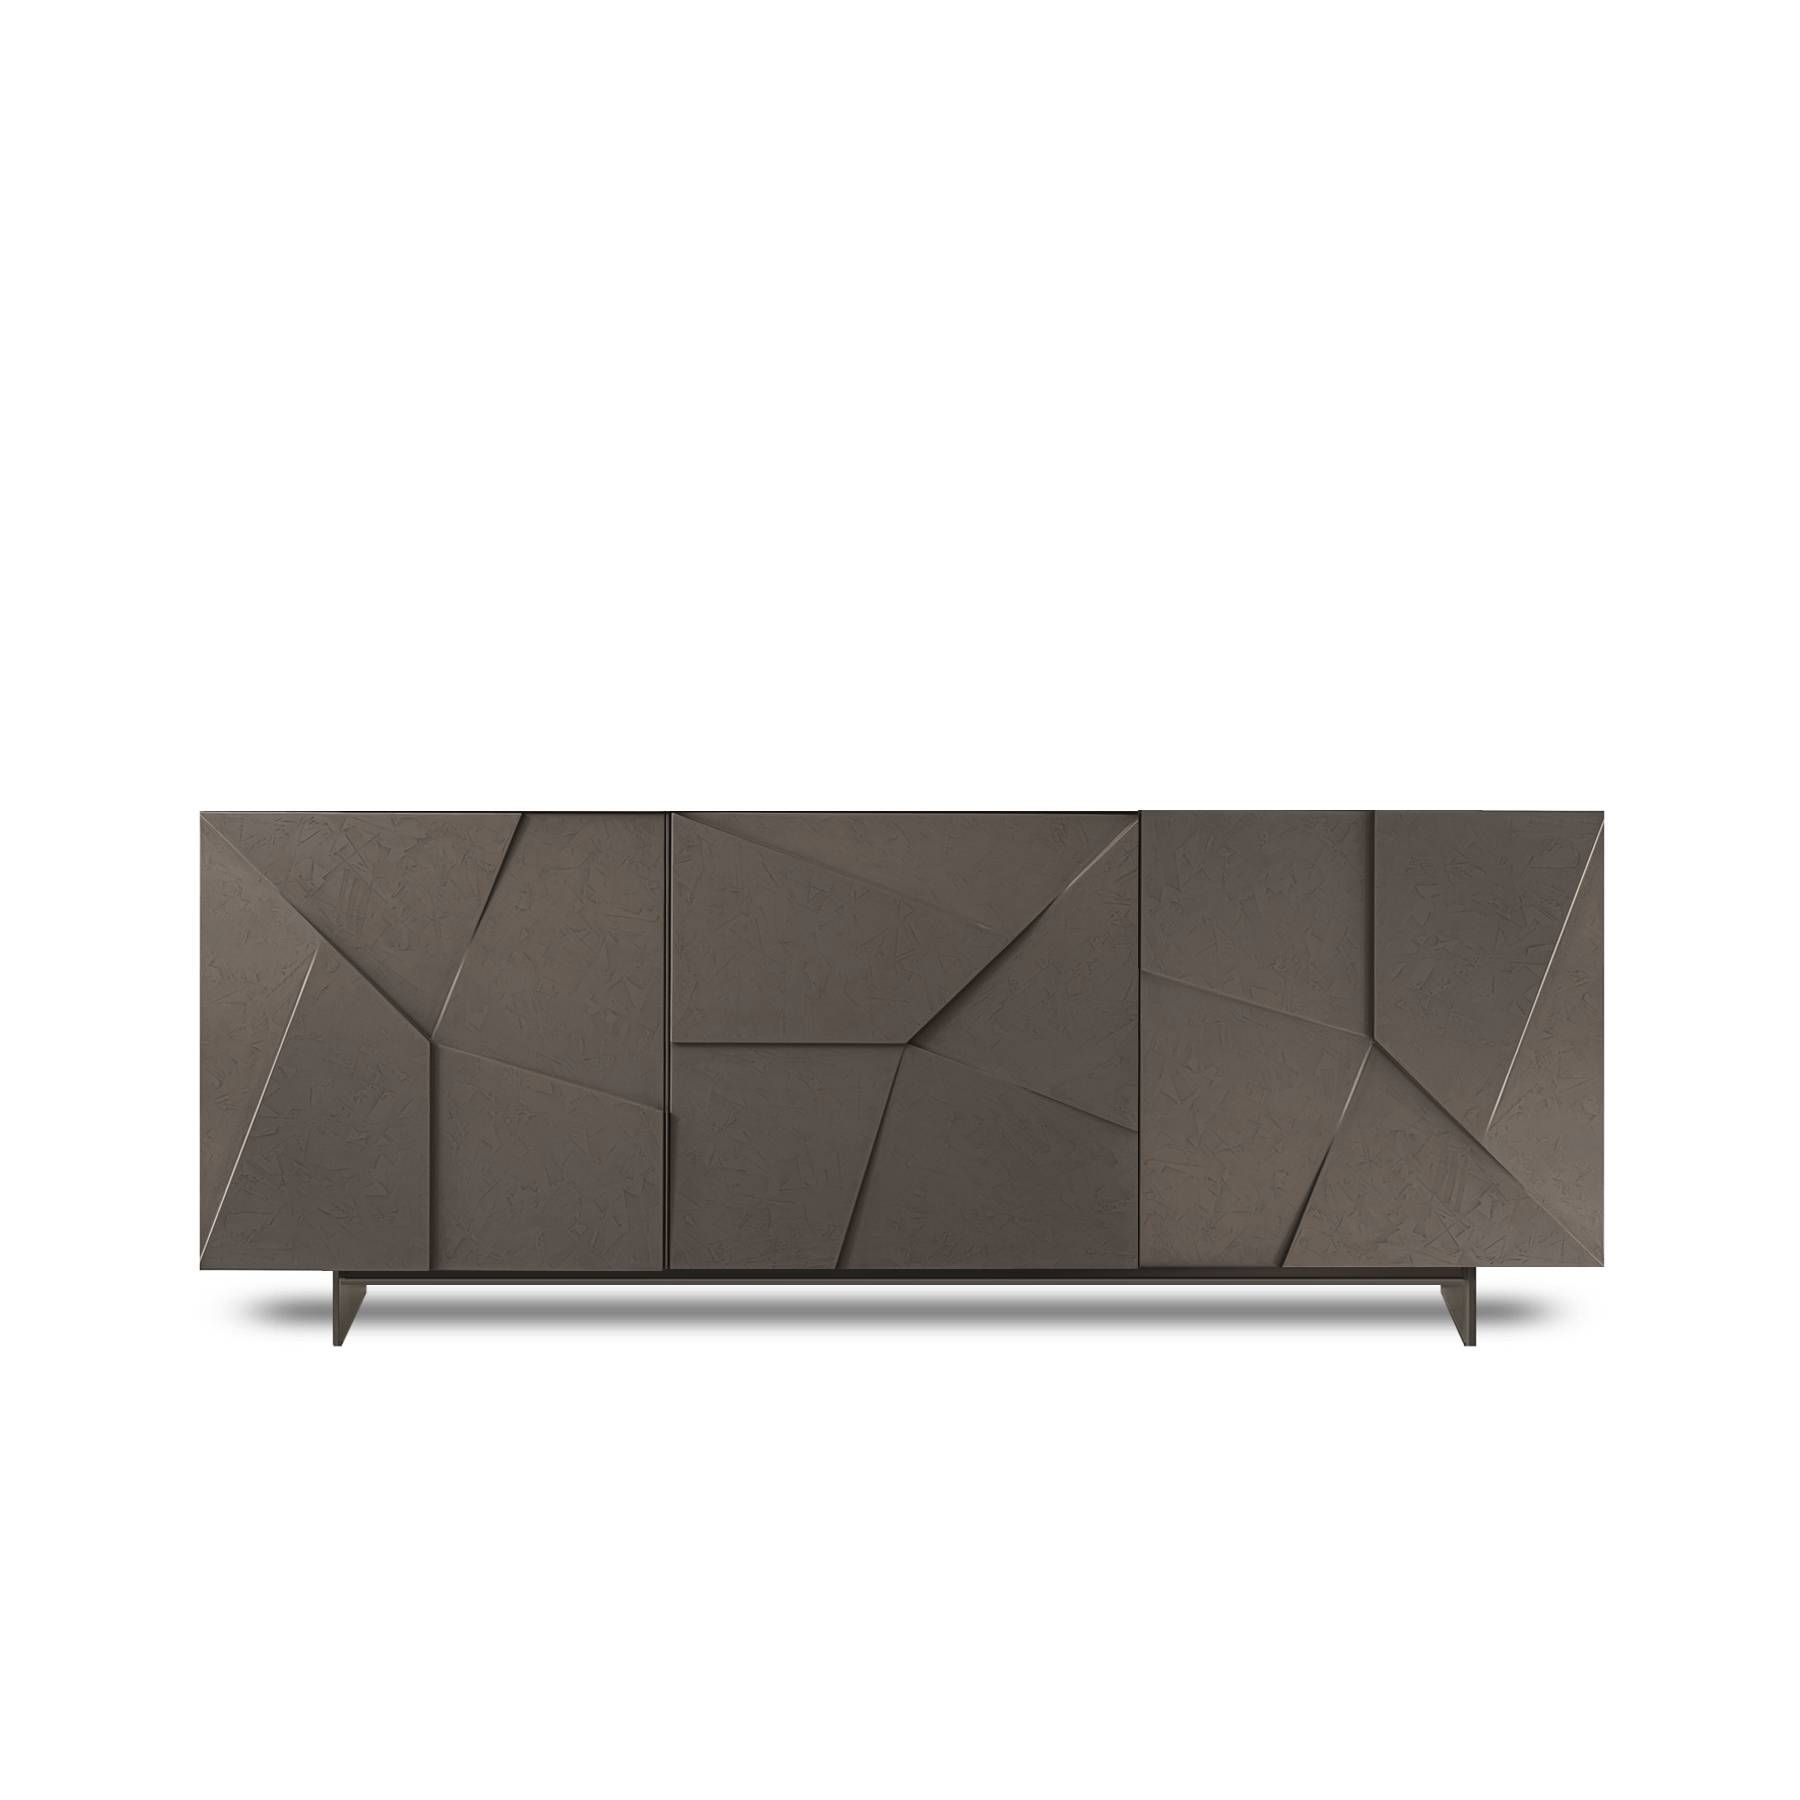 Modern Contemporary Sideboards, Storage Units My Italian Living Ltd Intended For Modern Sideboards (View 10 of 20)